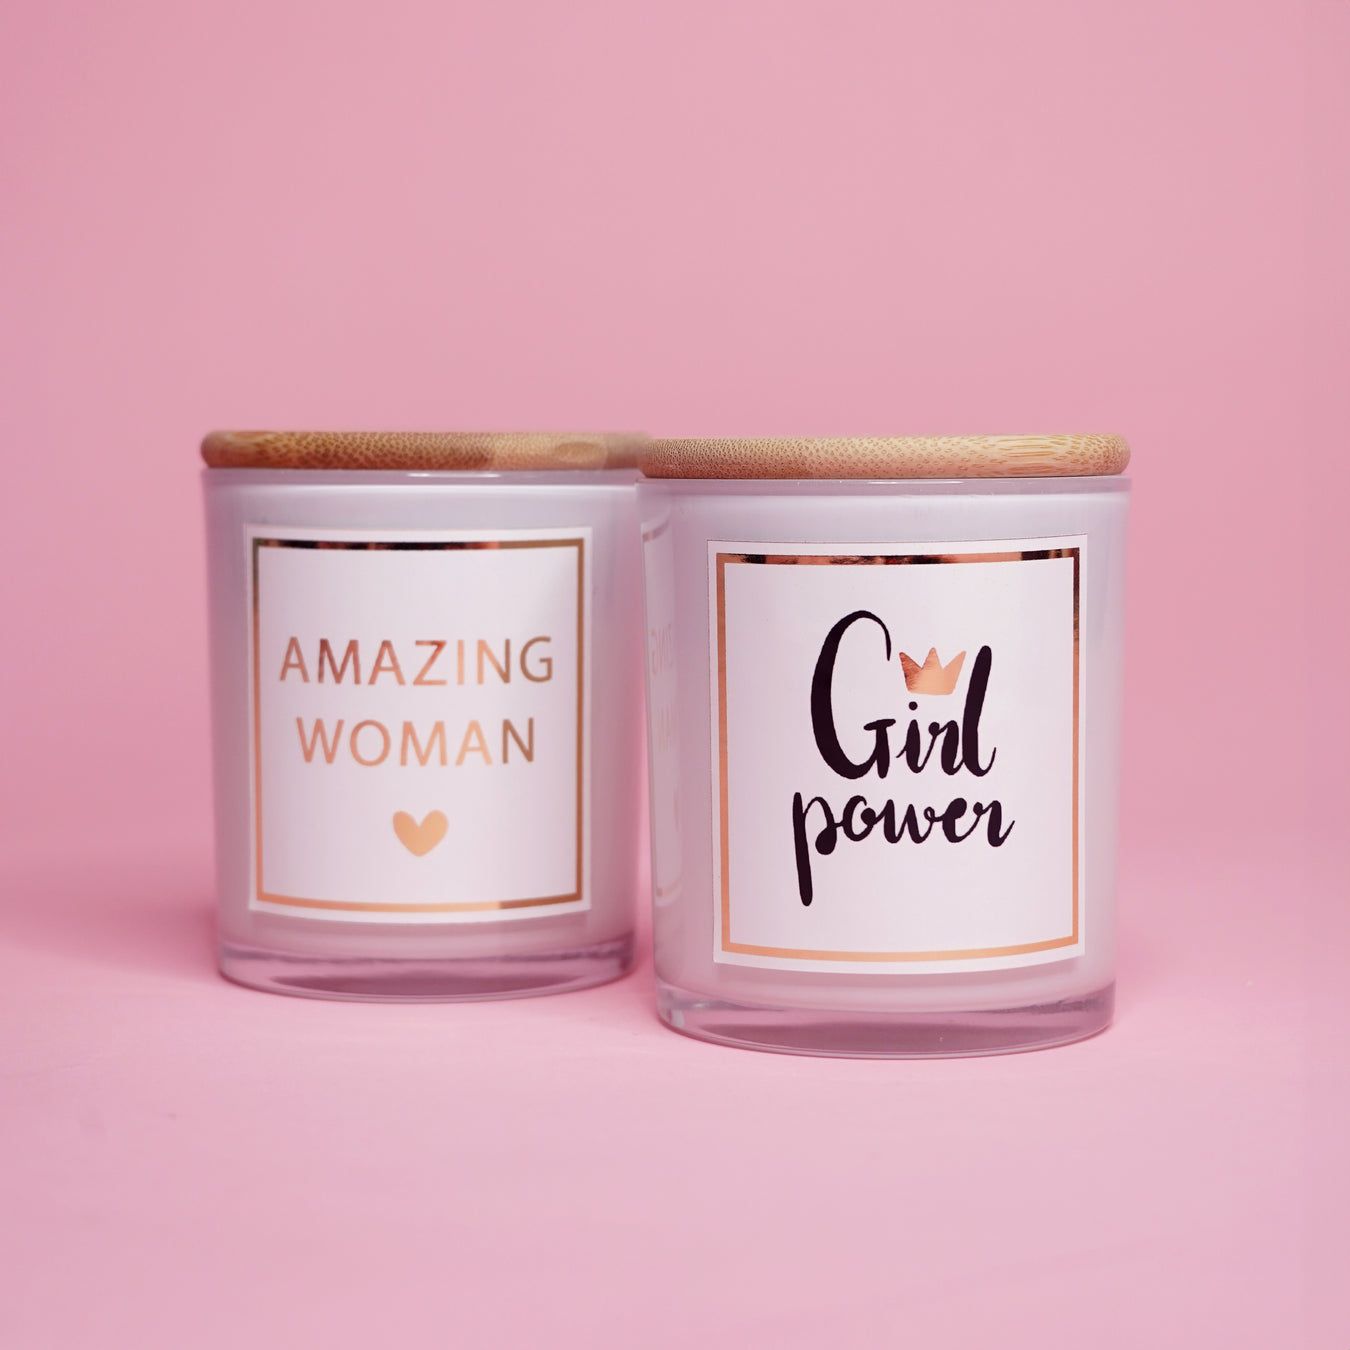 Non-personalised candles